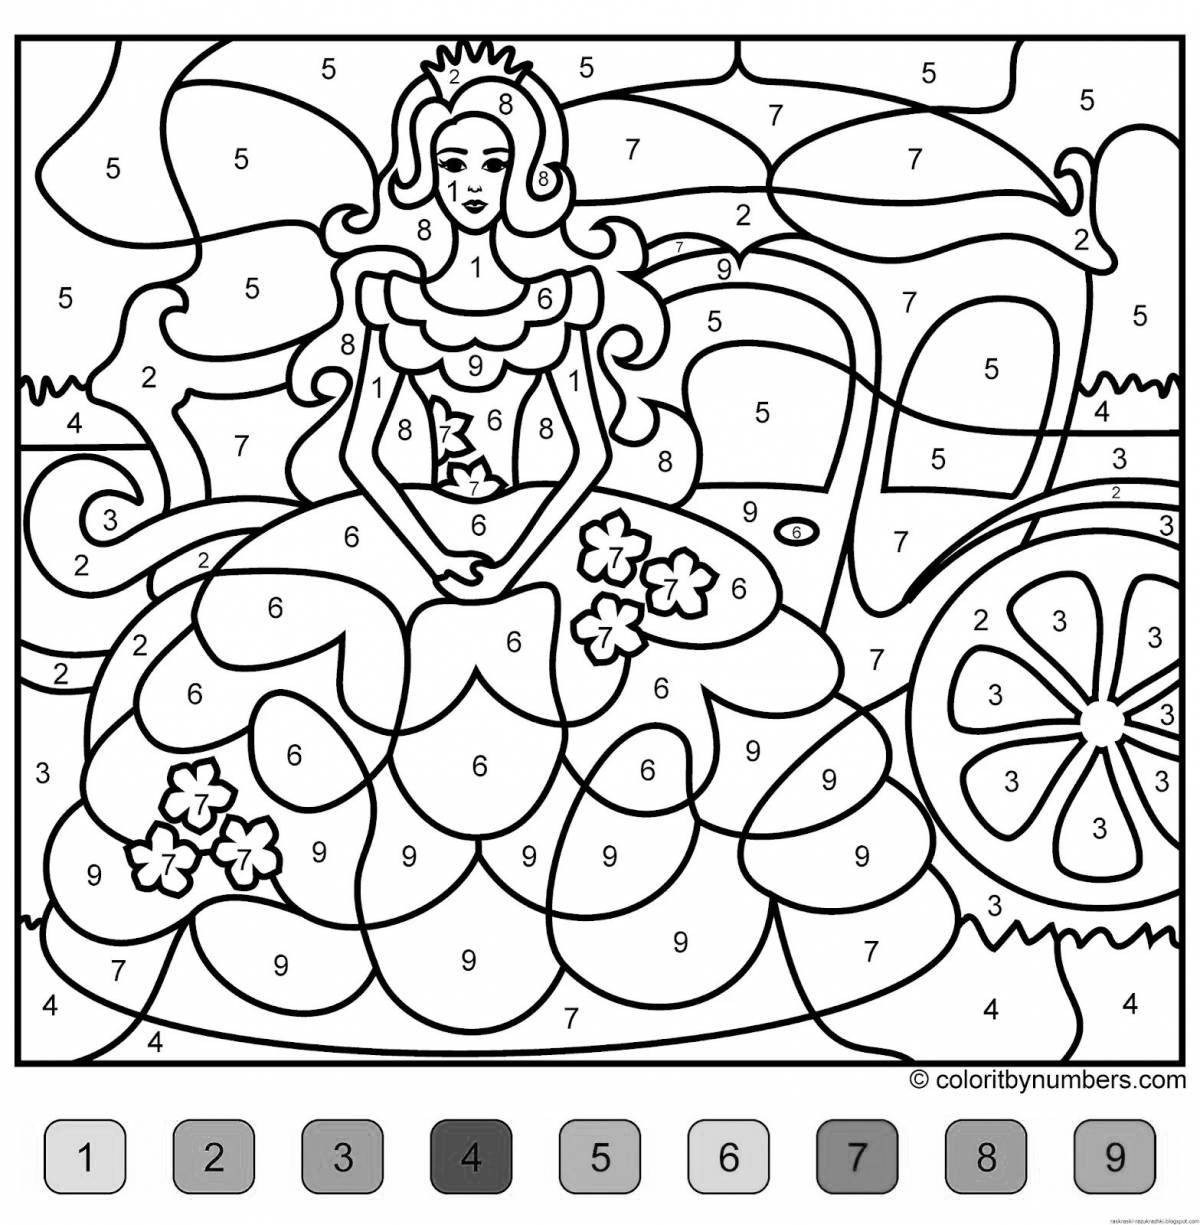 Involved coloring book, difficult for 6-7 year olds